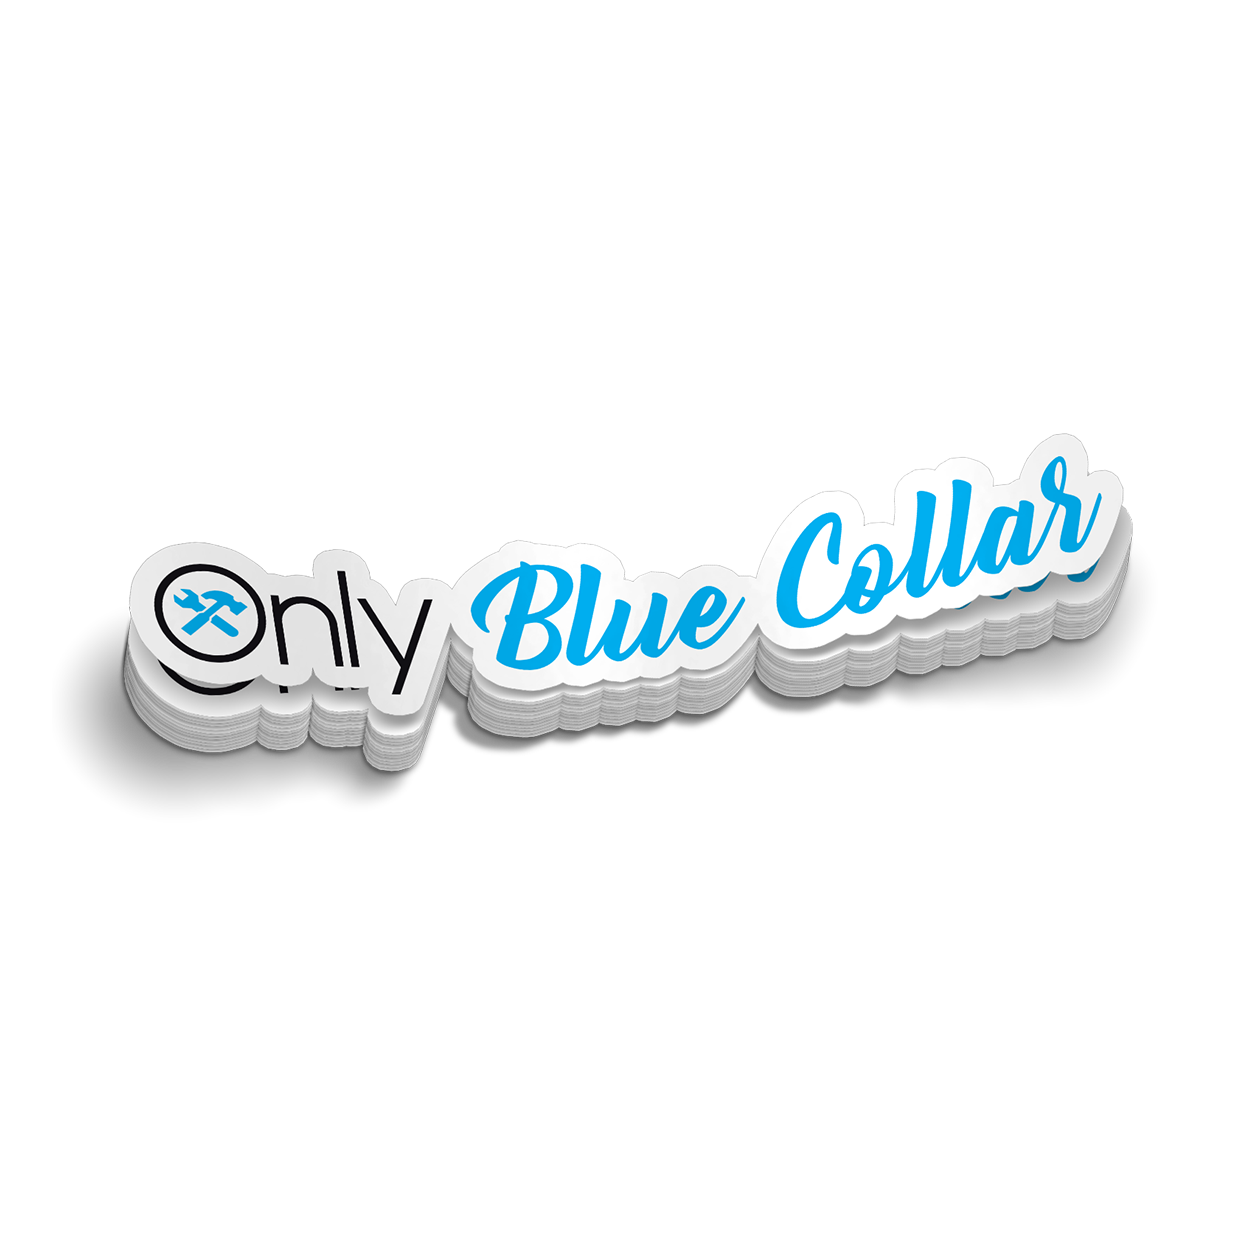 Blue collar stickers, hard hat stickers, stickers for men, funny stickers,  homemade stickers, must have stickers, stickers for hard hats